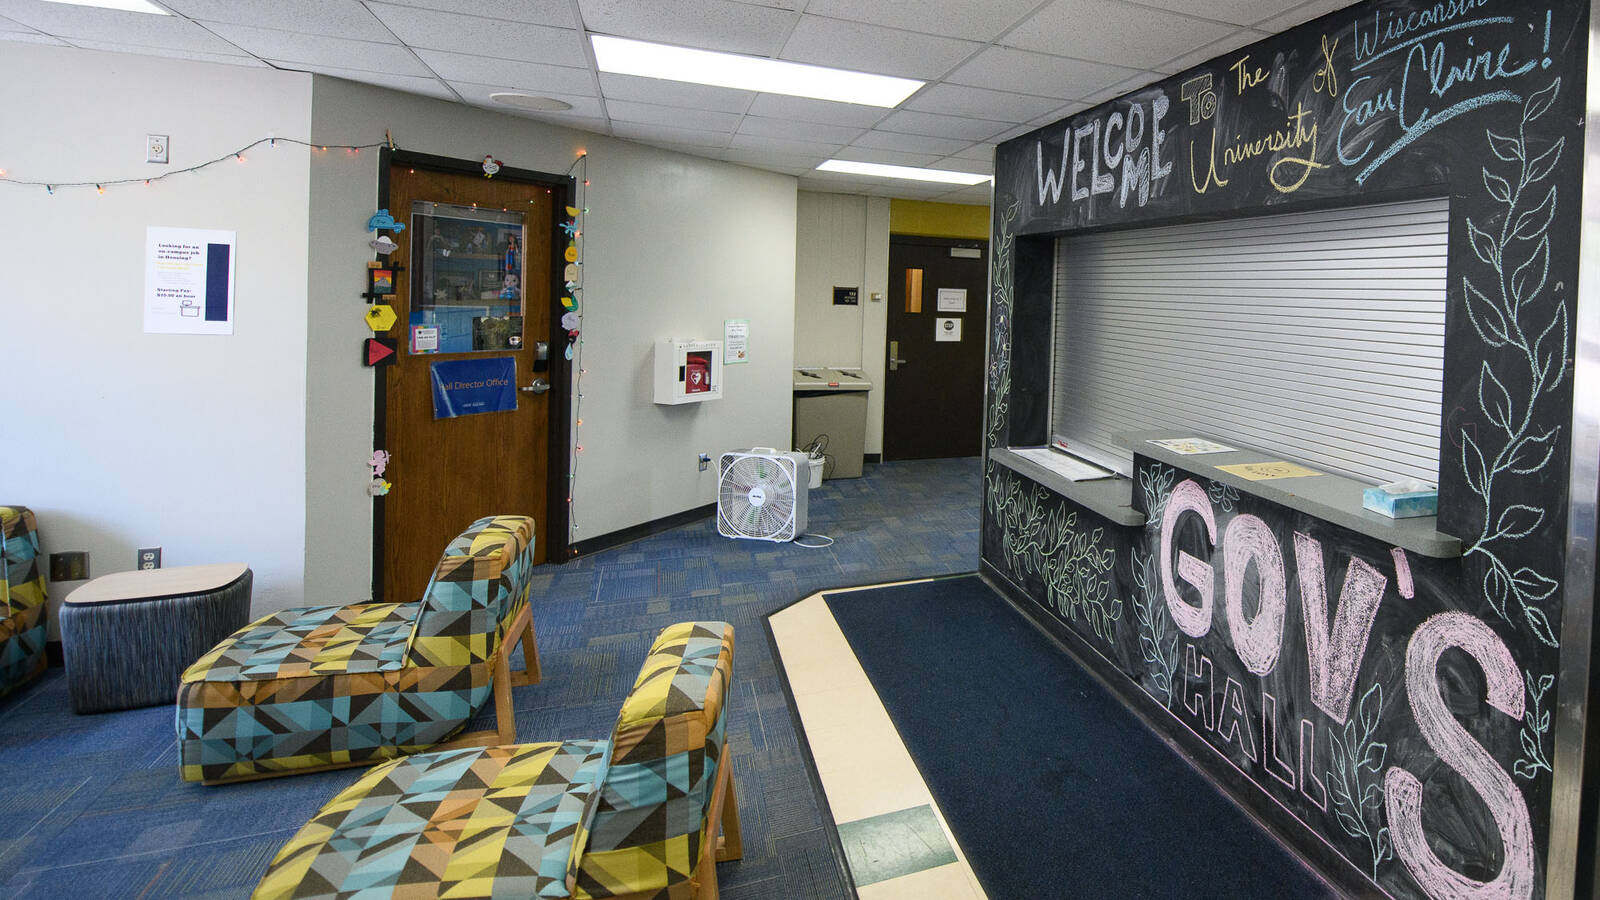 Lobby area of Governors Hall with colorful chairs and a welcome desk surrounded by a chalkboard wall decorated with a "Welcome to UWEC" message.